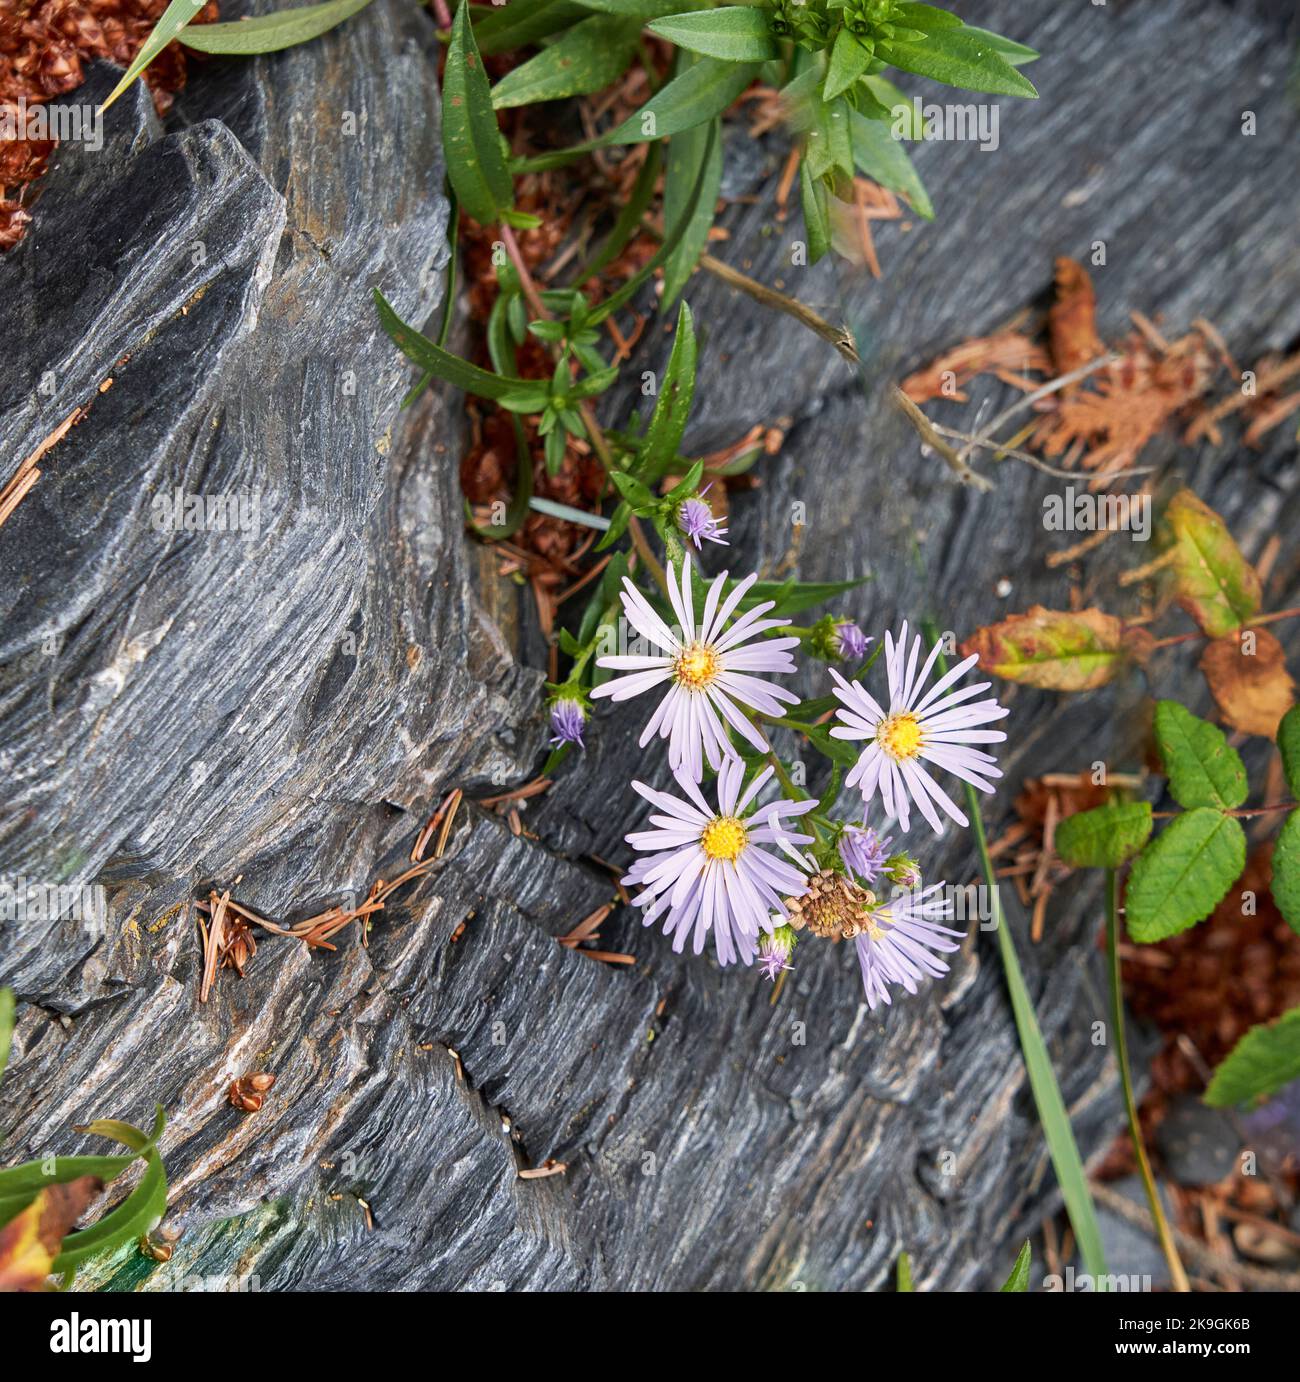 Tiny stubborn daisy-like white and purple flowers growing on a log at an ocean beach. Stock Photo